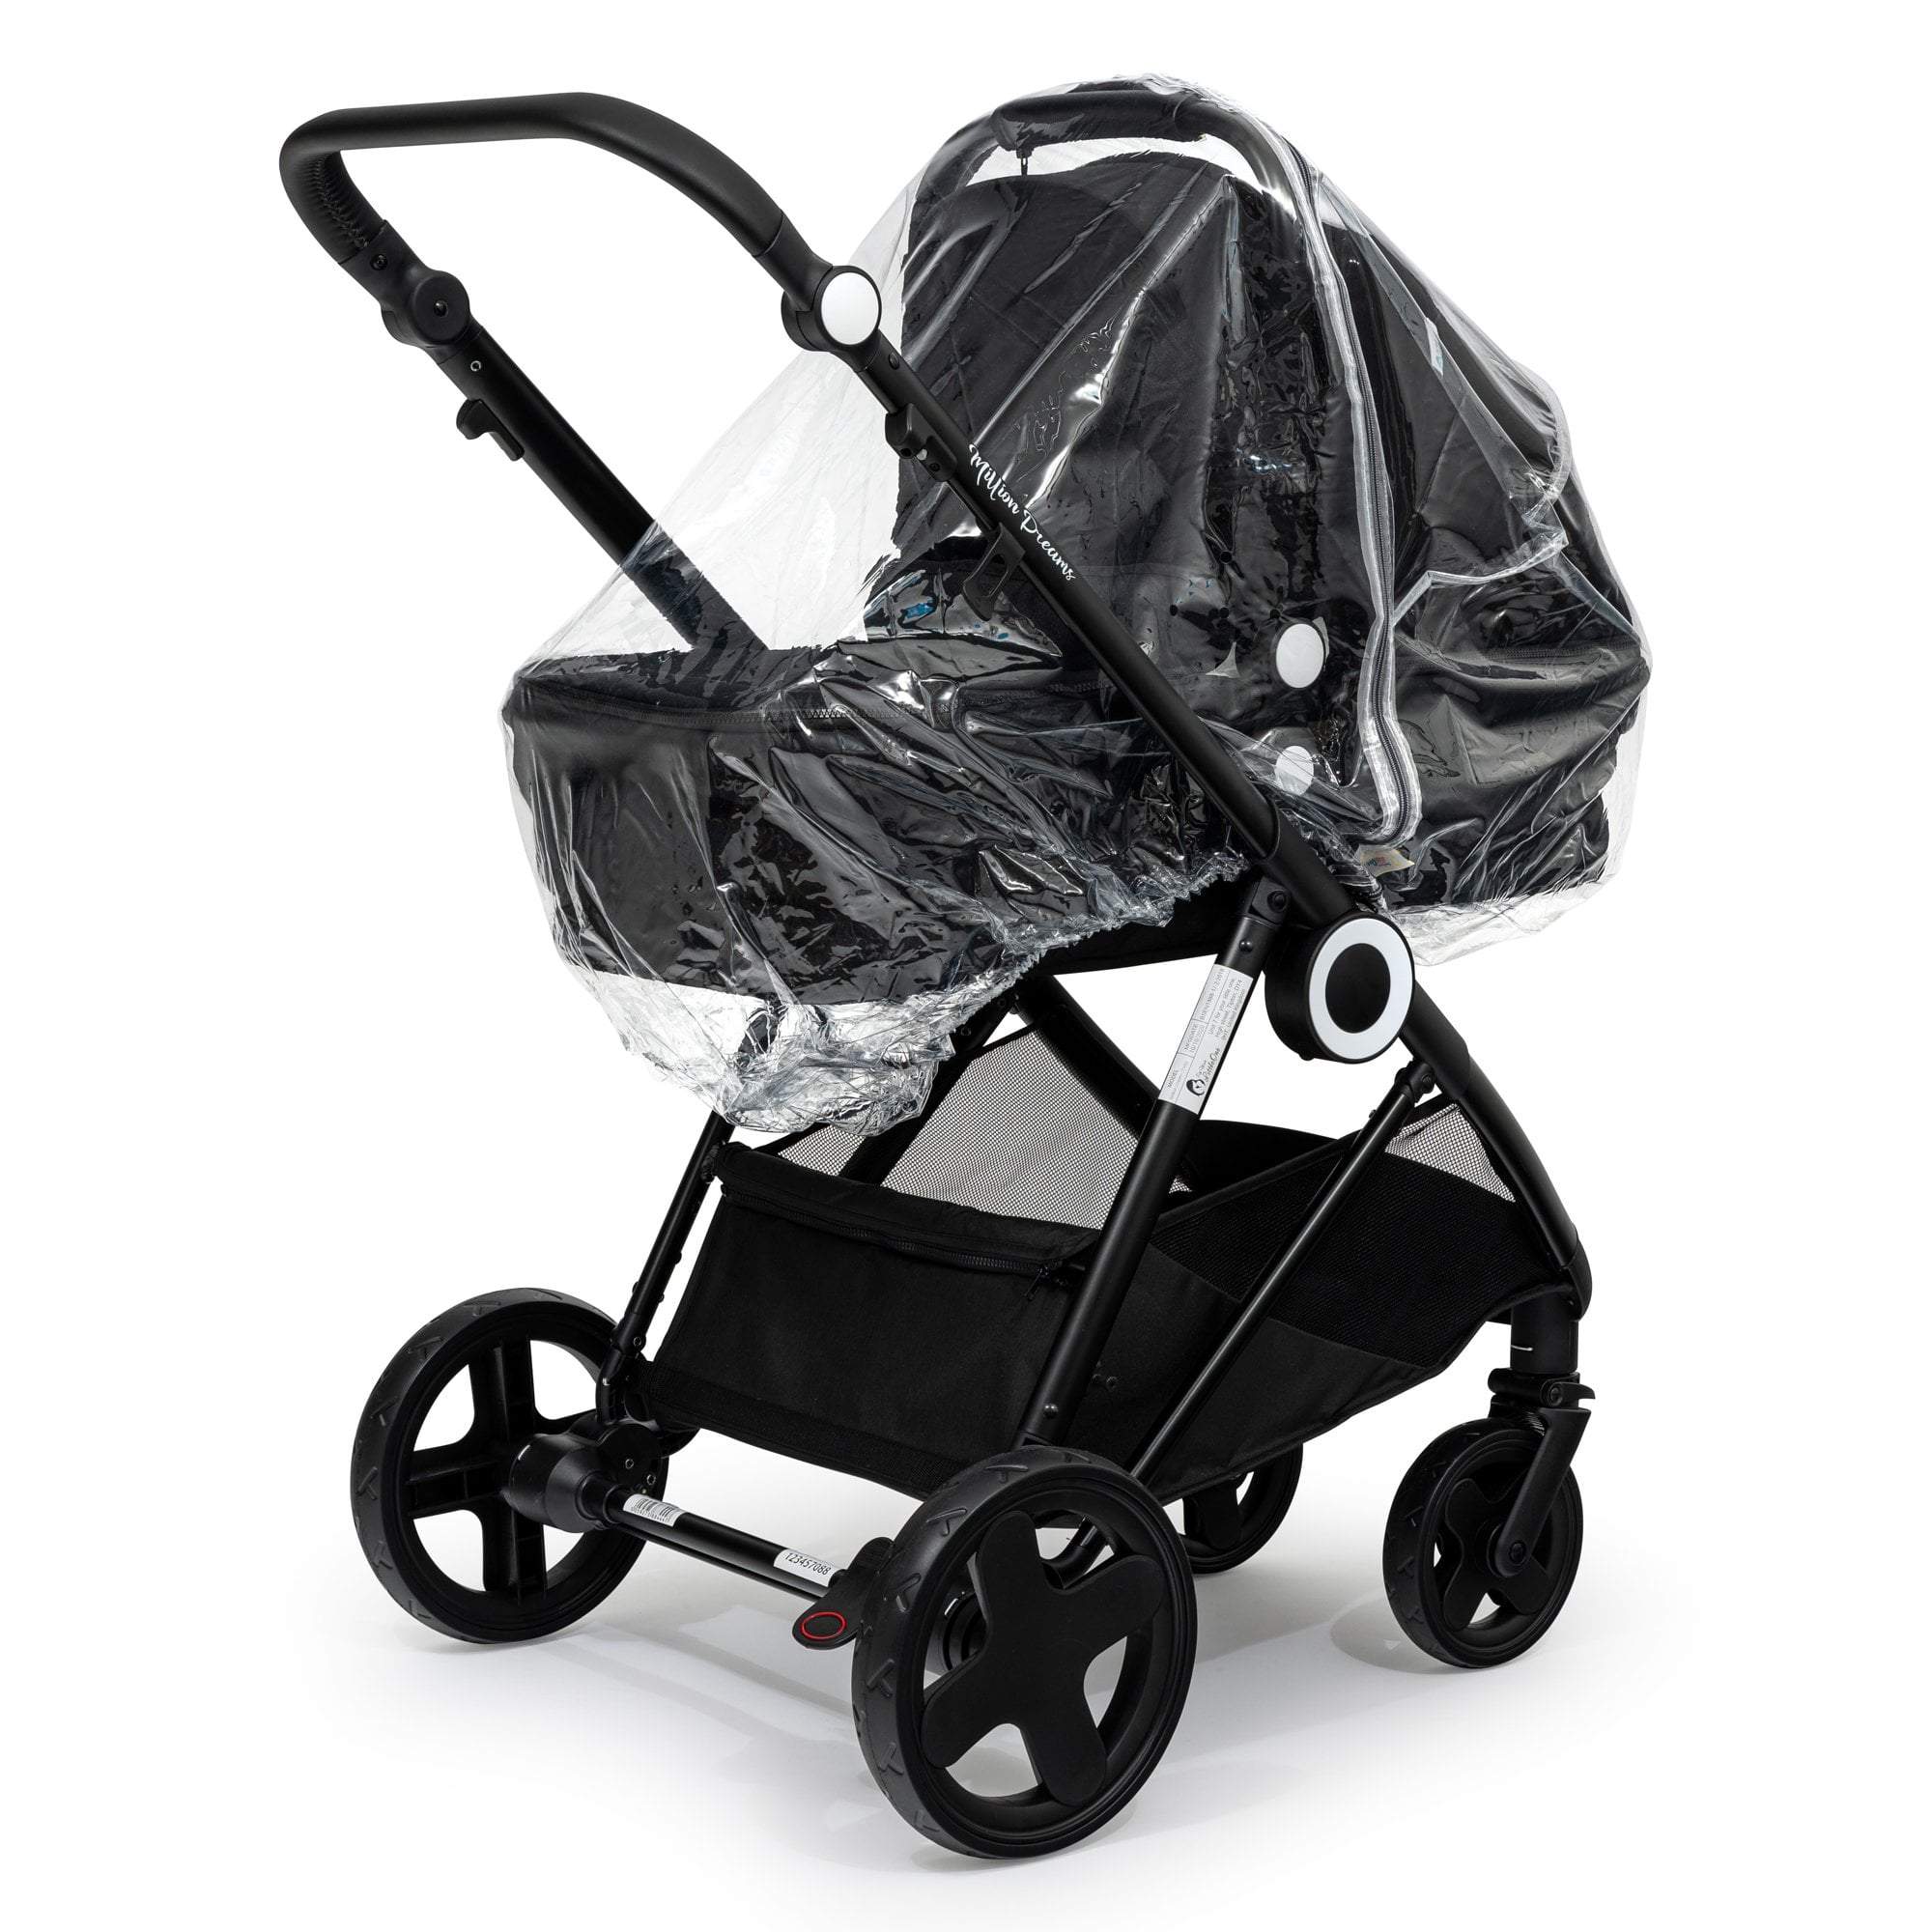 Carrycot Raincover Compatible With Mima - Fits All Models - For Your Little One